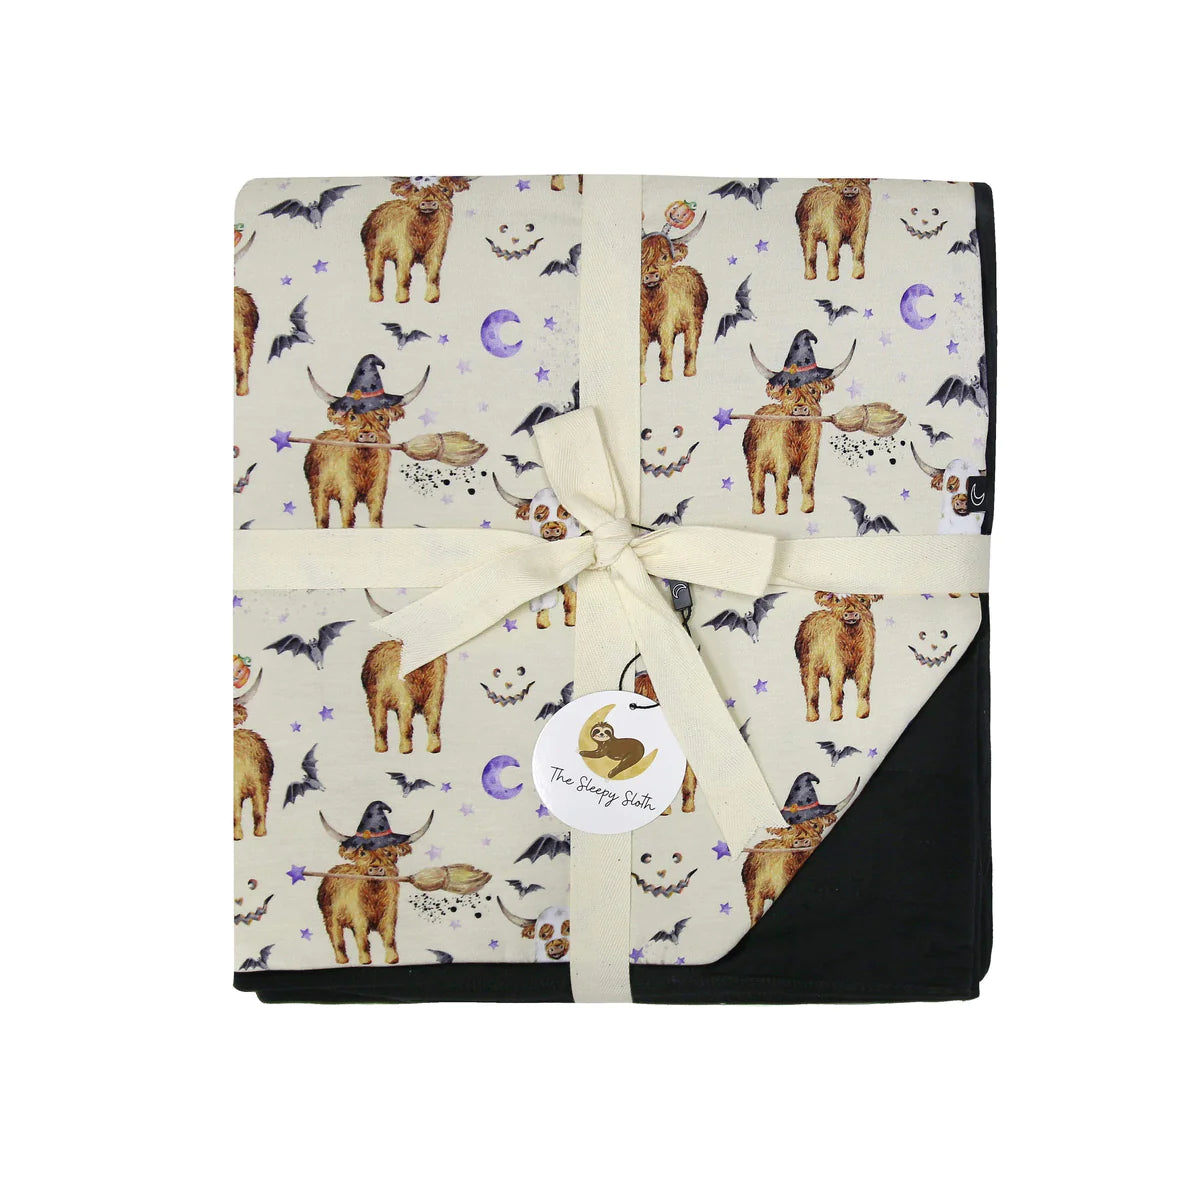 Shop The Sleepy Sloth Moo Boo Crew Highland Cow Halloween Print Toddler Blankie Blanket at Purple Owl Boutique